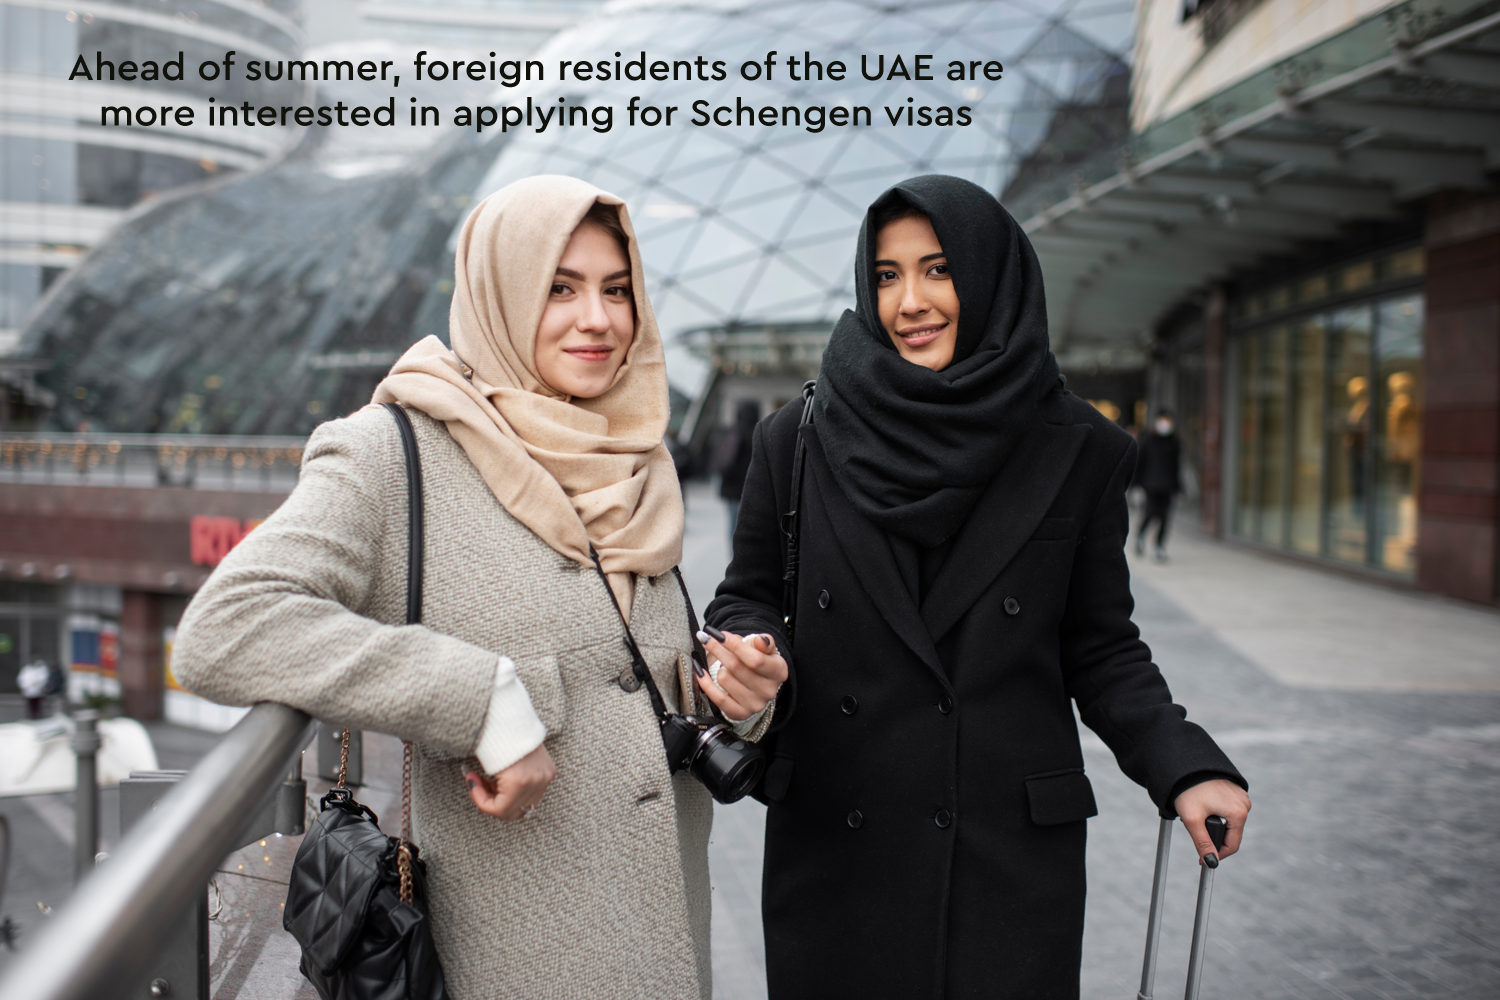 Ahead of summer, foreign residents of the UAE are more interested in applying for Schengen visas.